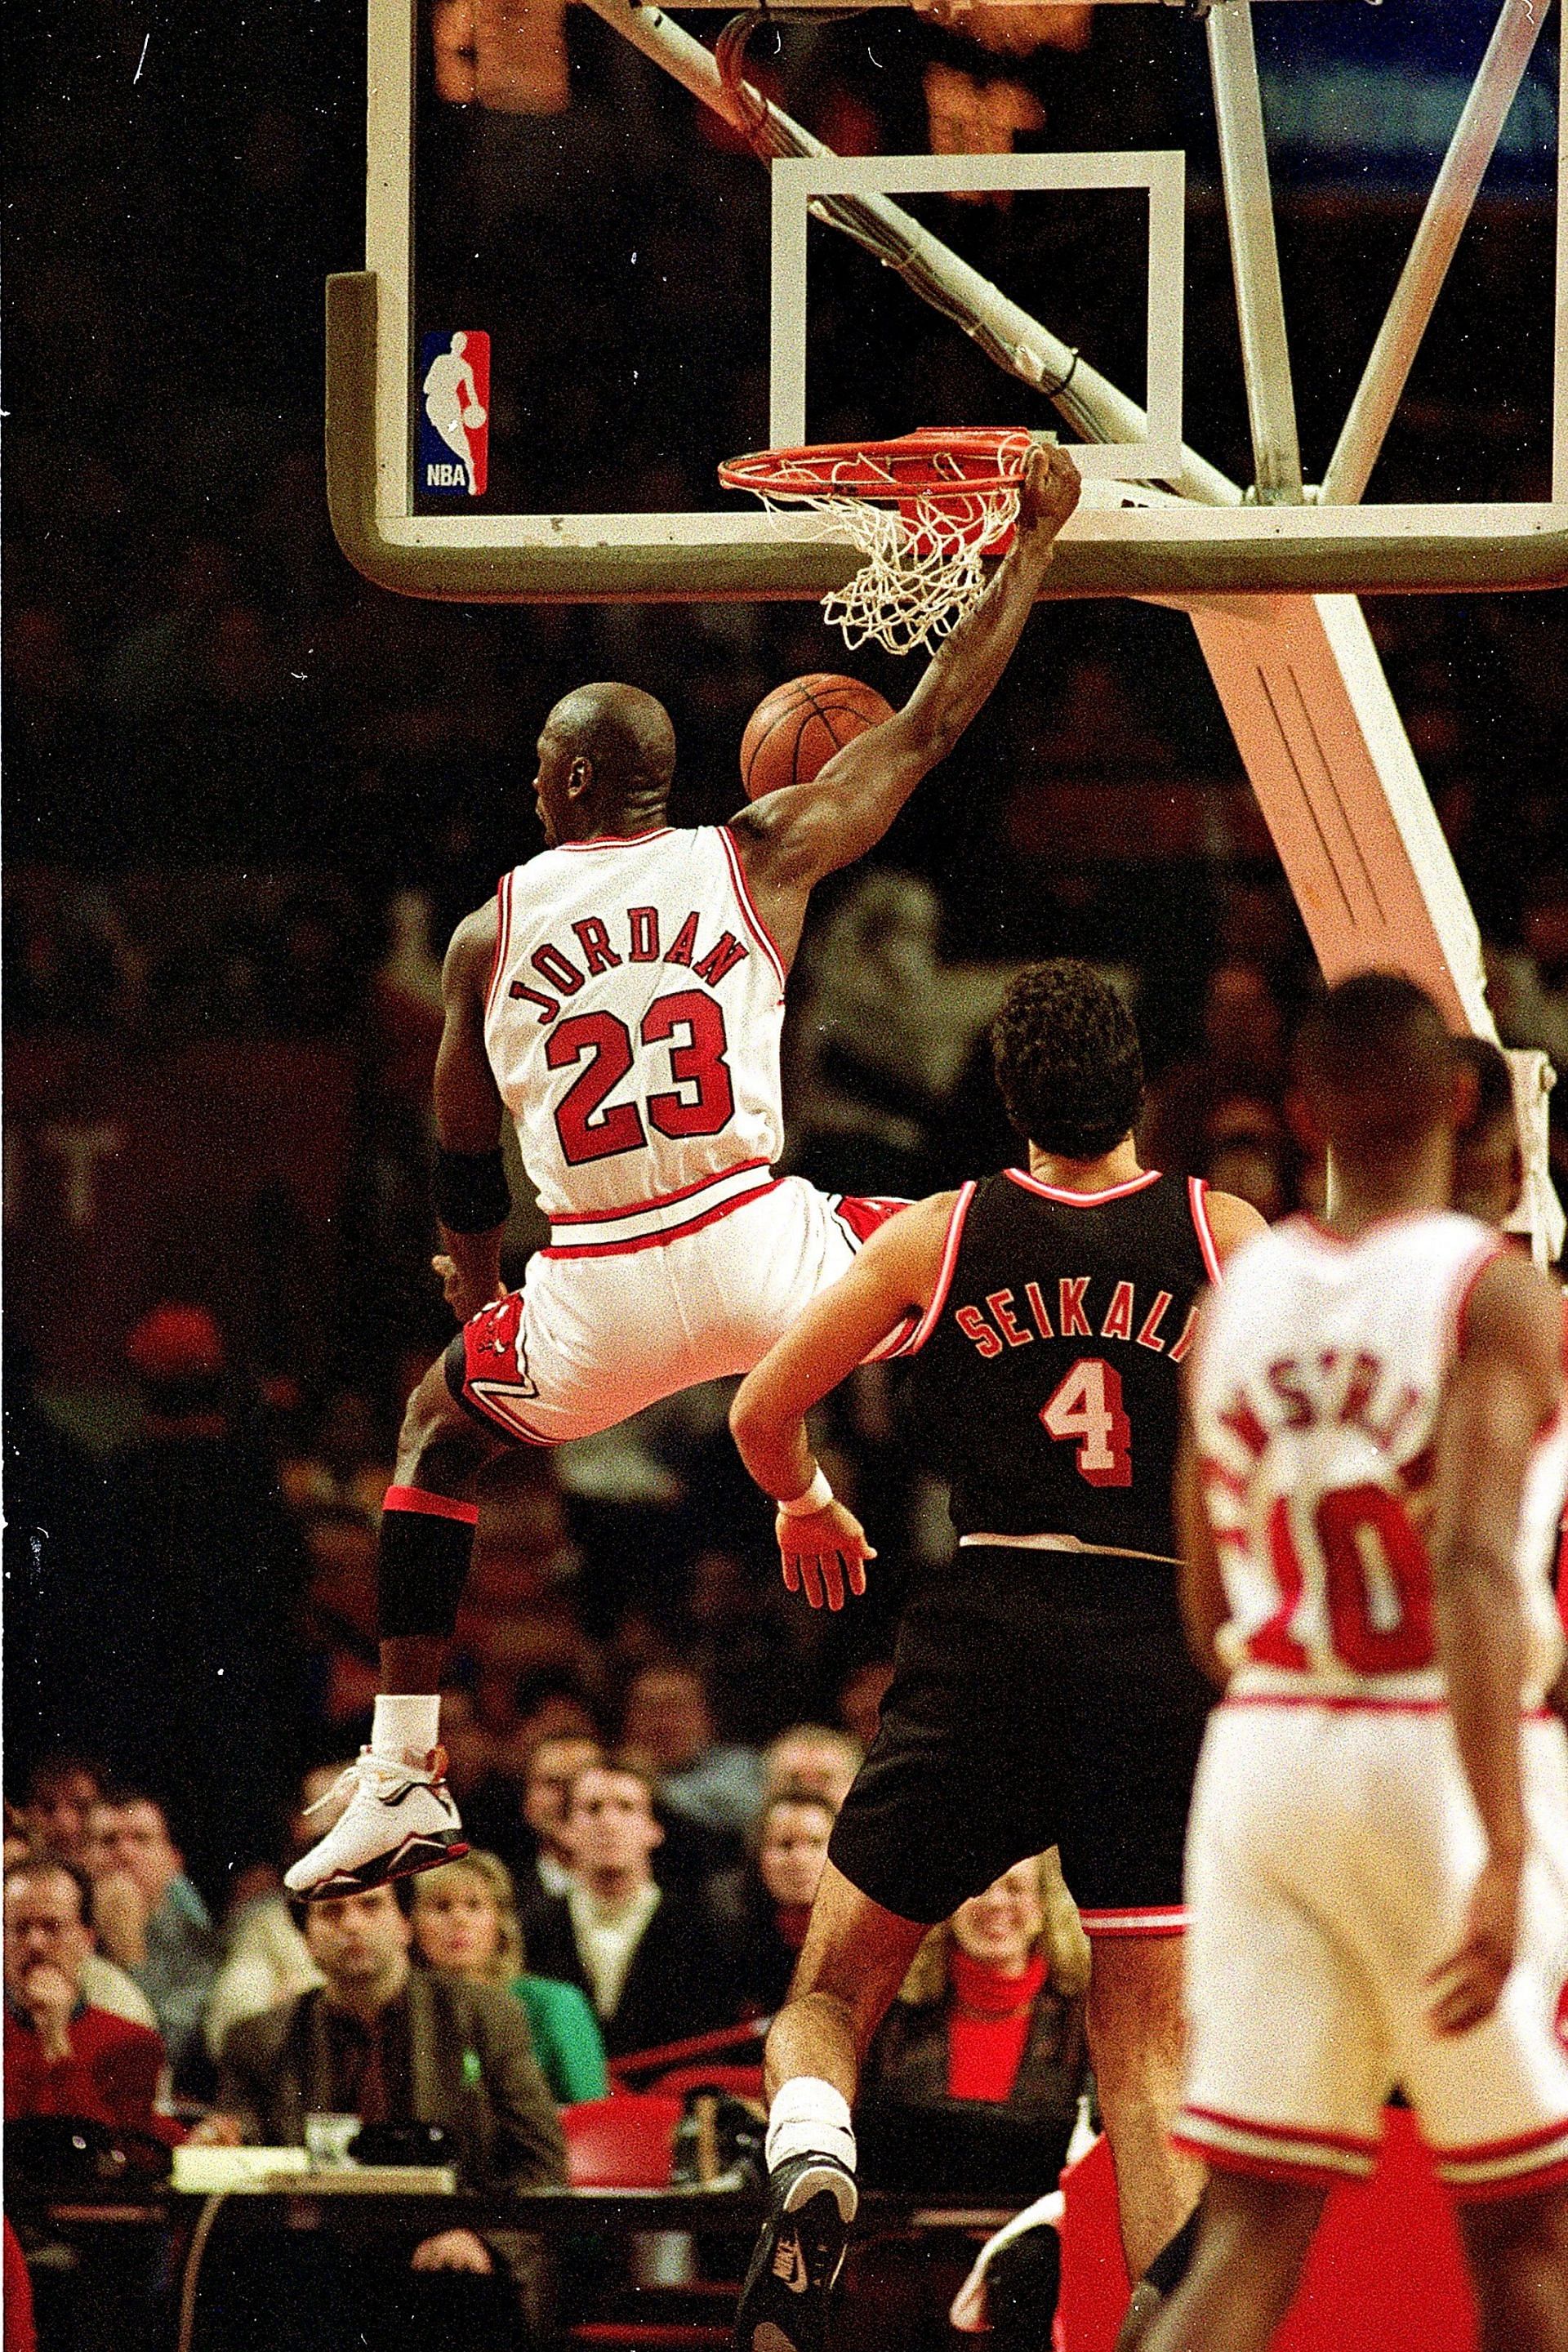 Michael Jordan #23 of the Chicago Bulls dunks the ball during the game against the Miami Heat.